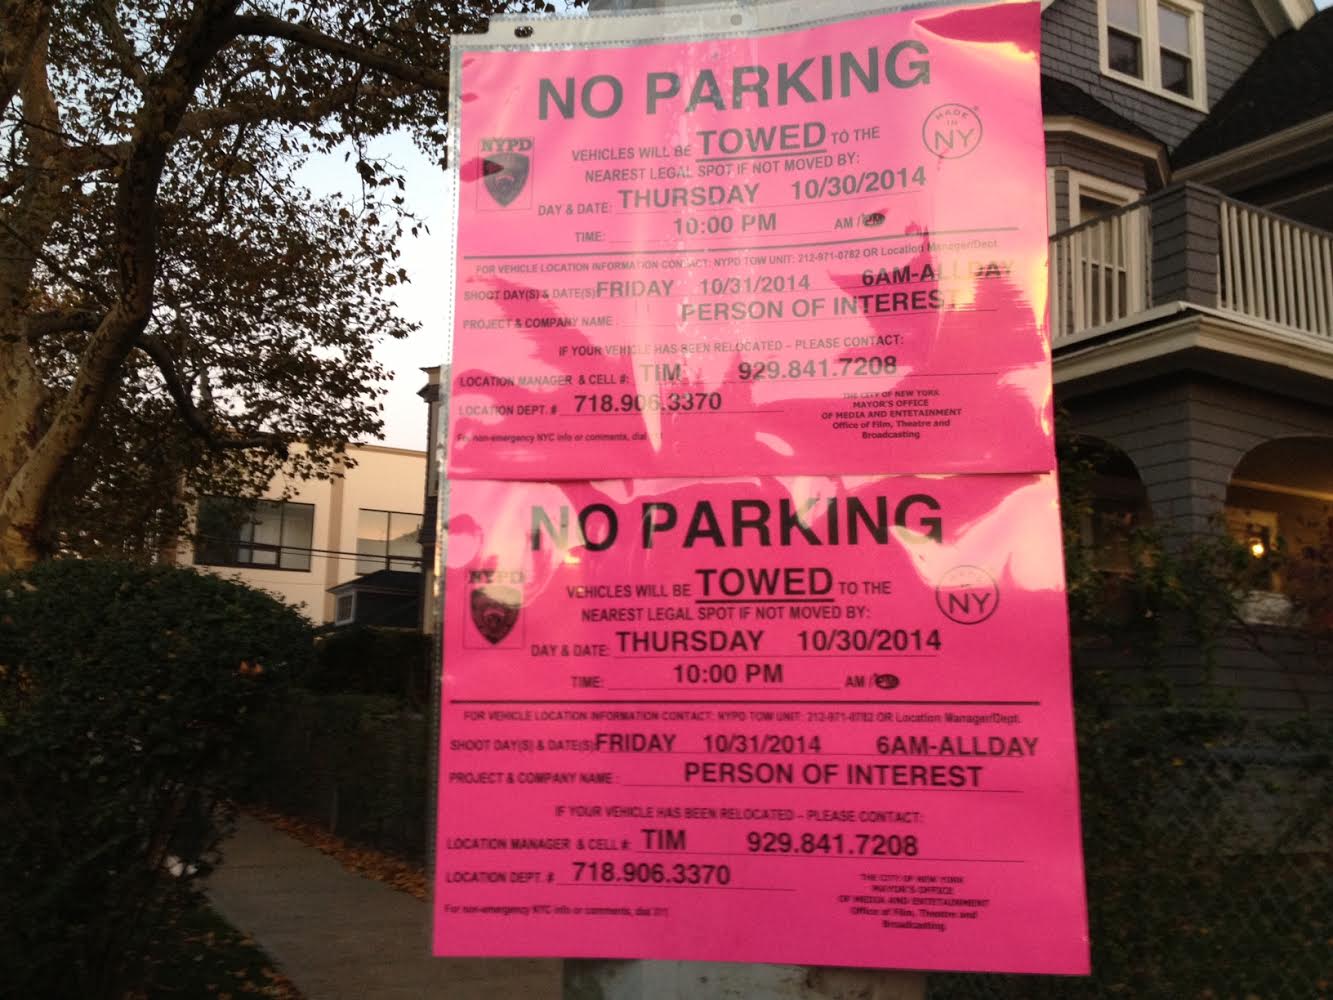 CBS’ Person Of Interest To Film On Argyle This Friday – Move Your Cars By Thursday Night